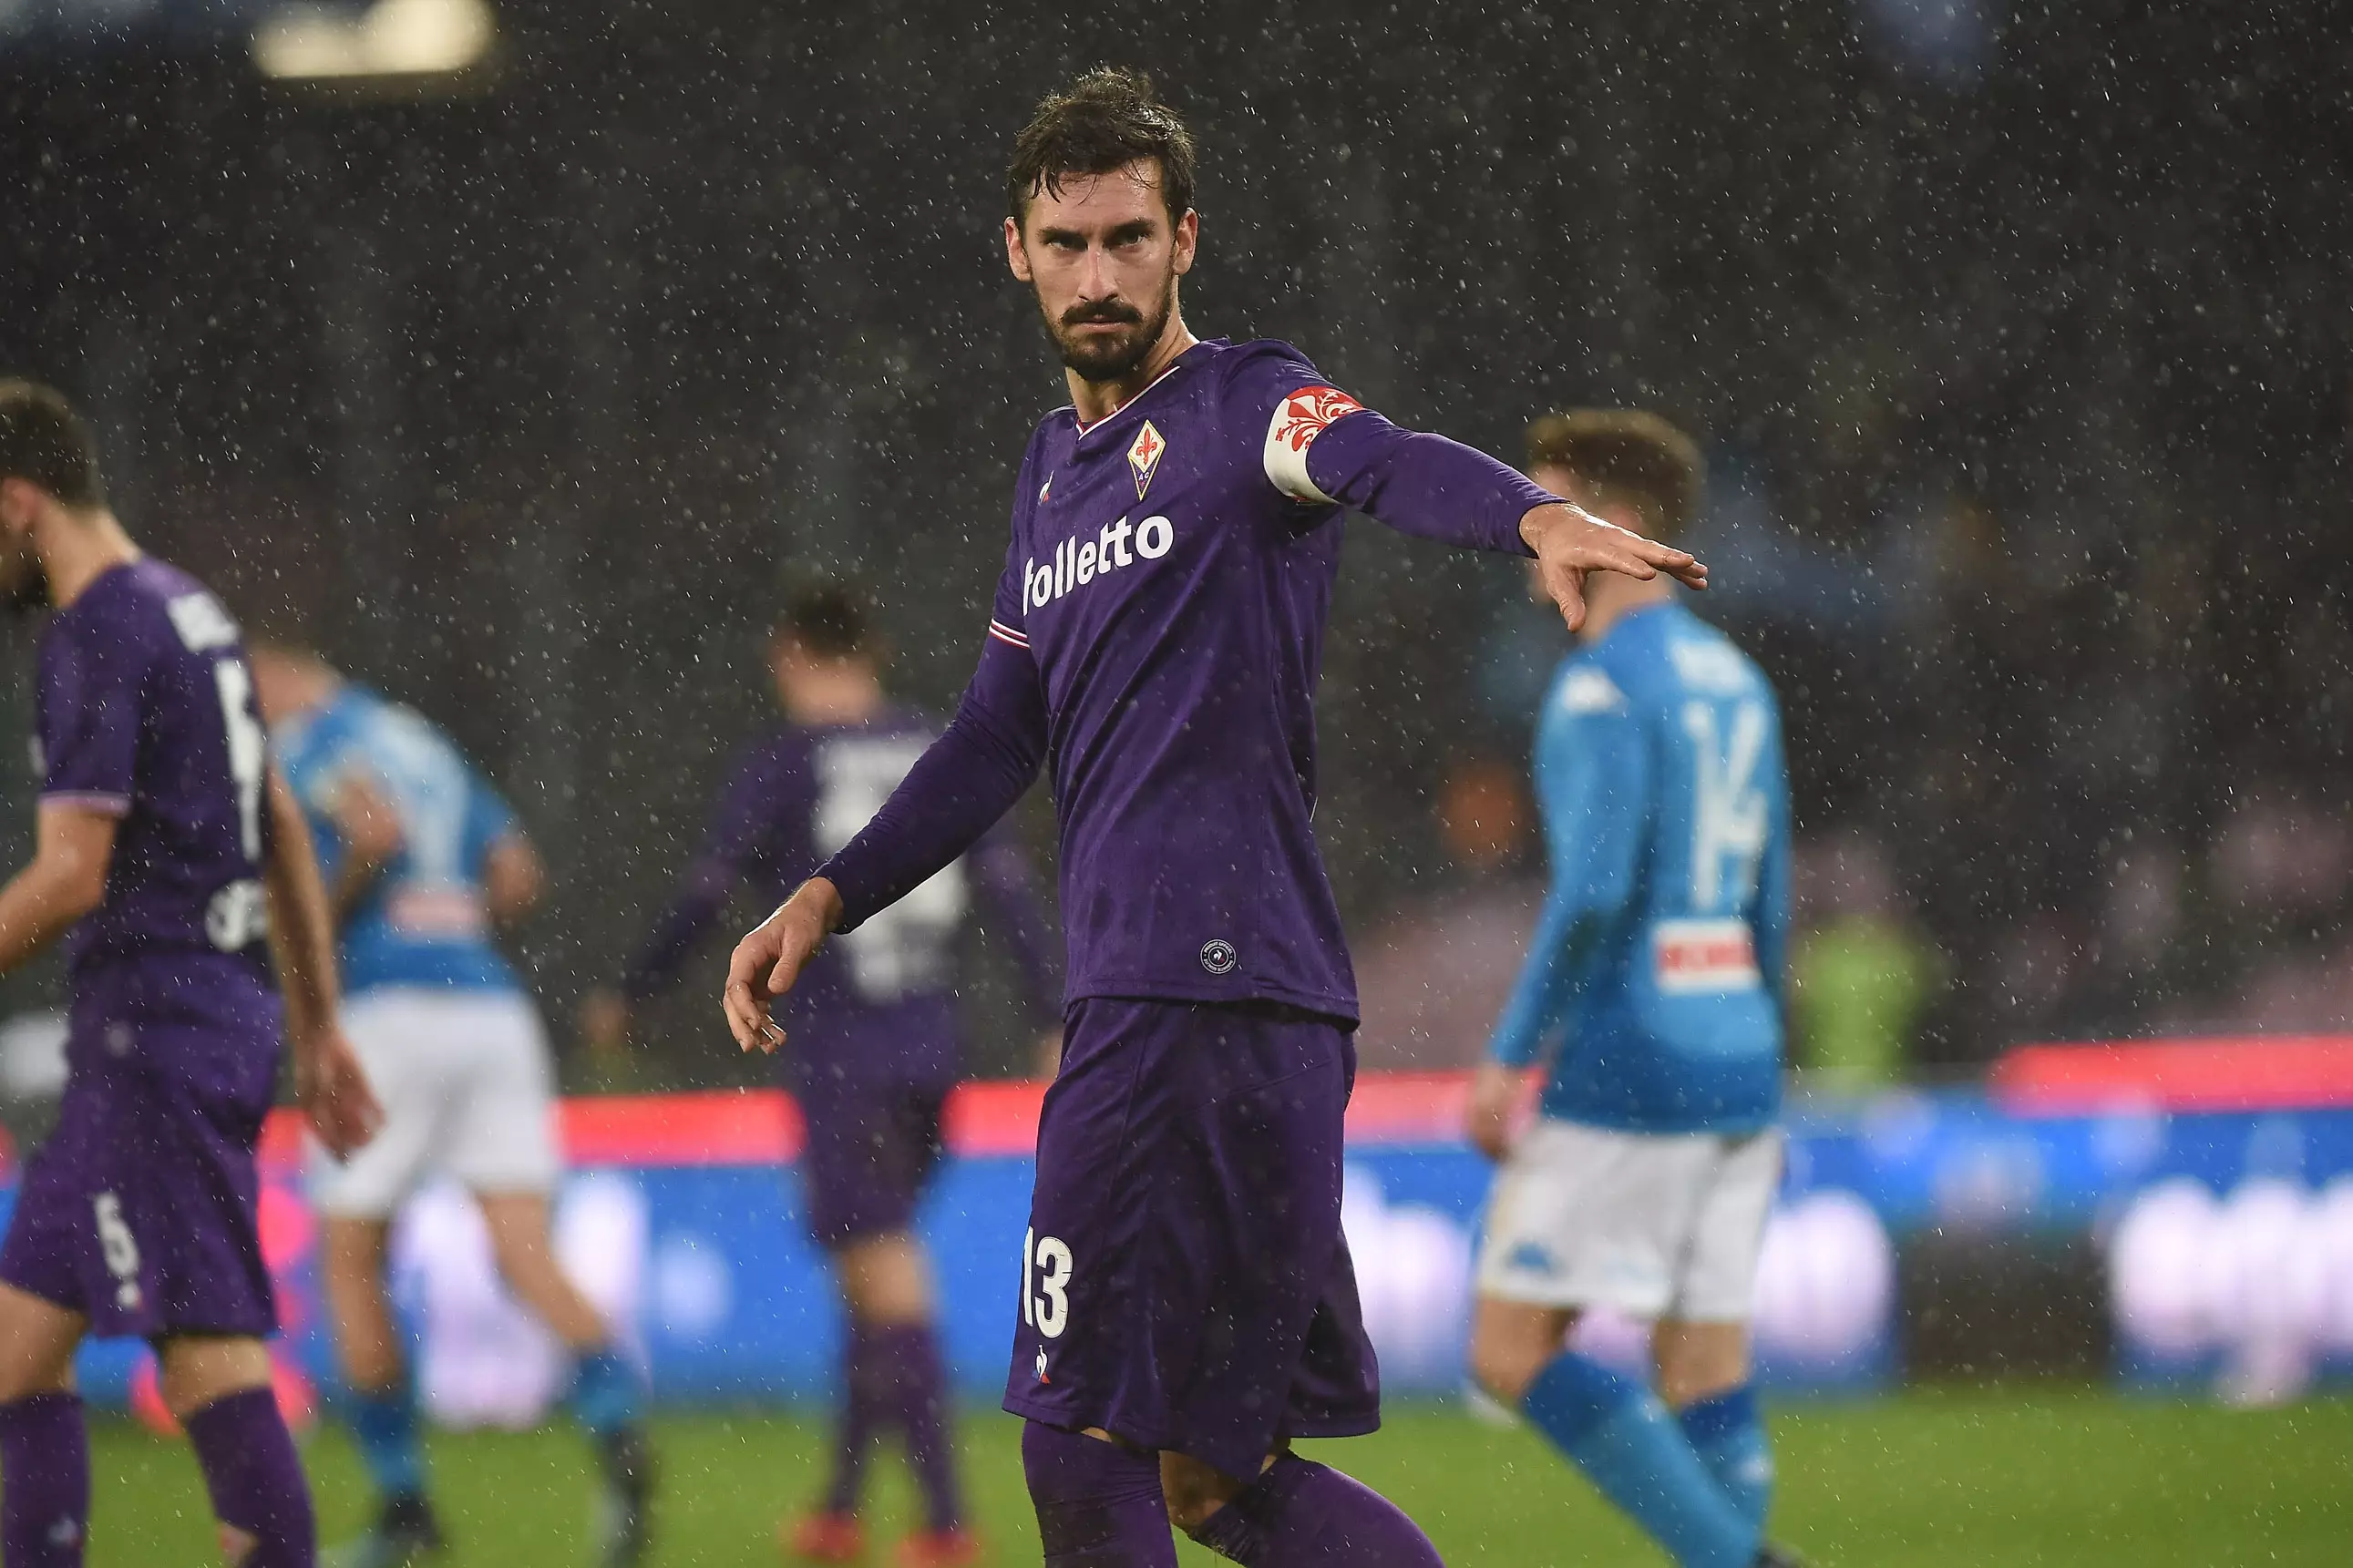 Astori in action for Fiorentina. Image: PA